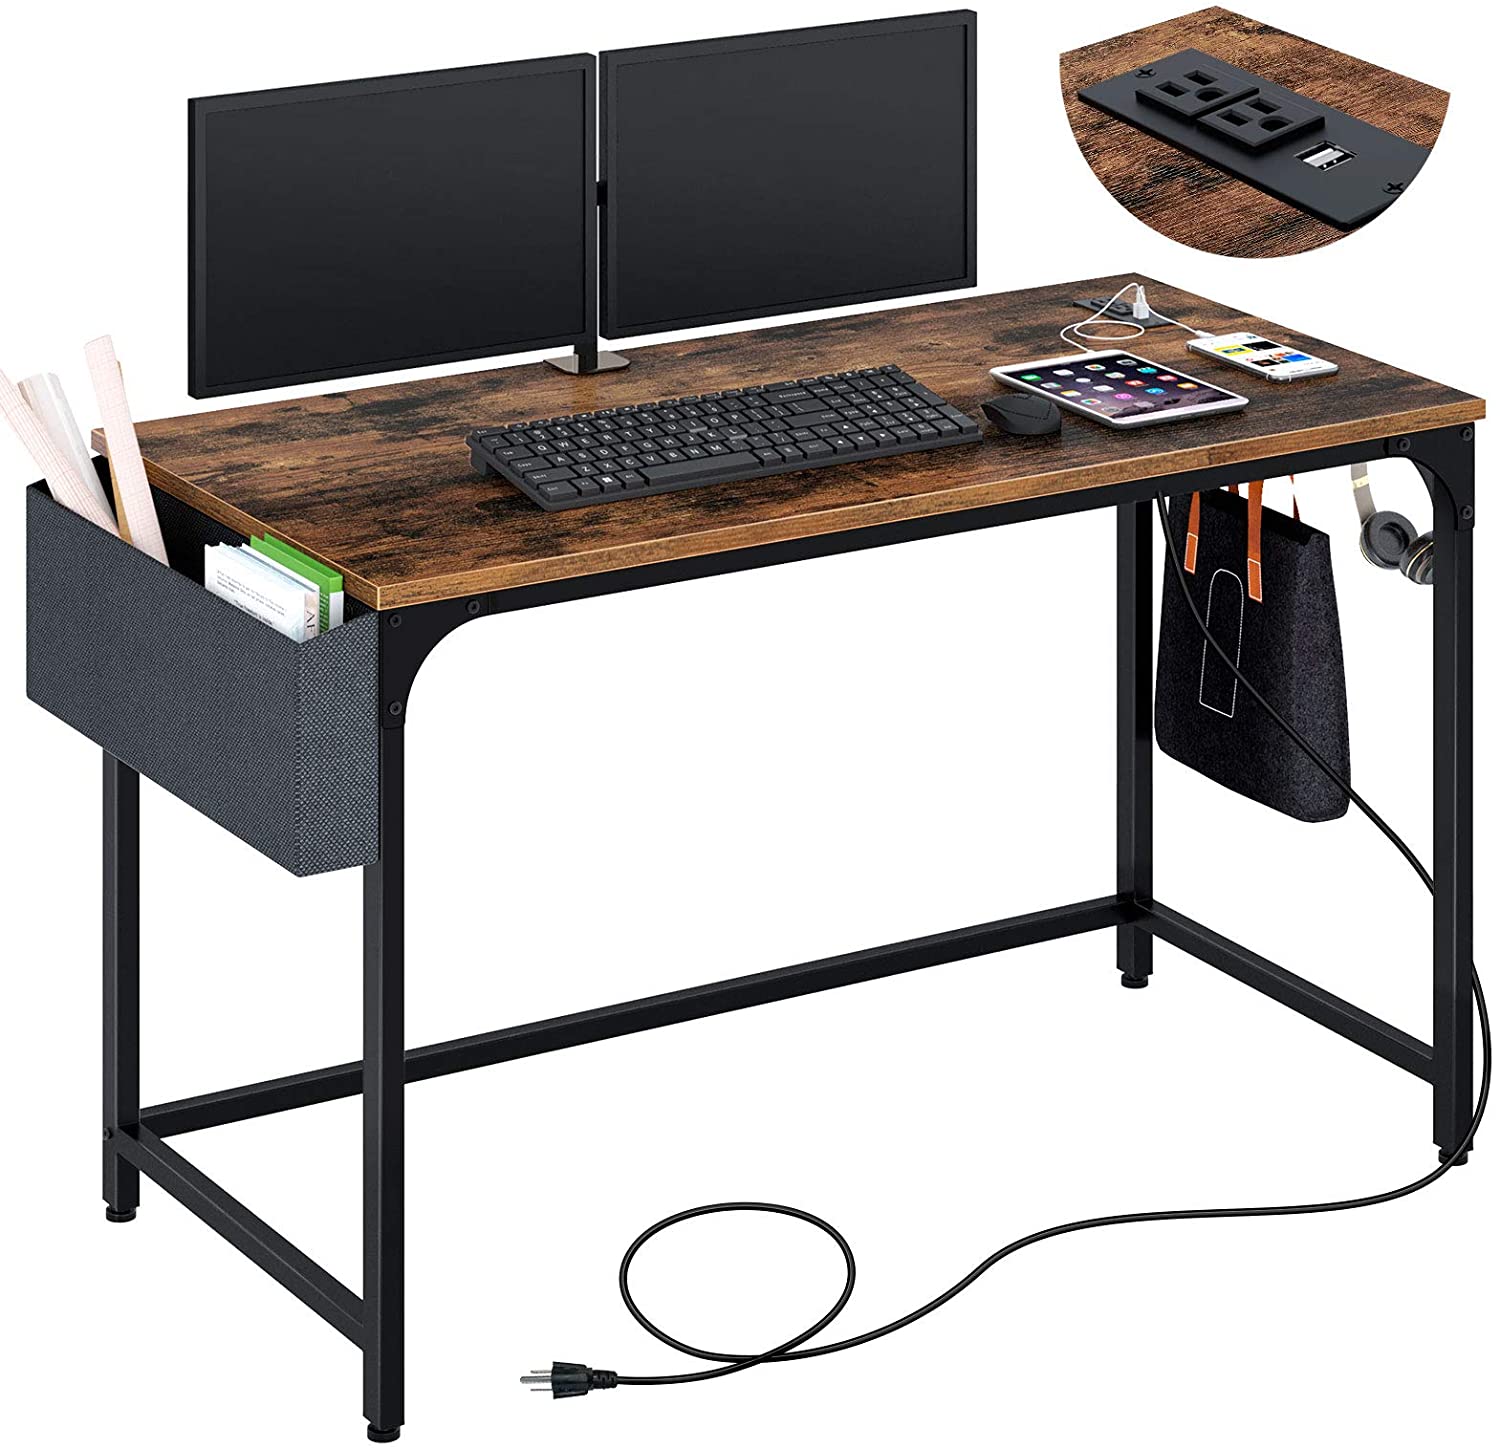 Photo 1 of Rolanstar Computer Desk with Power Outlet Home Office PC Desk with USB Ports Charging Station 39 Desktop Table with Side Storage Bag and Iron Hooks Stable Metal Frame Workstation Rustic Brown USED MINOR COSMETIC DAMAGE PLEASE SEE PHOTOS